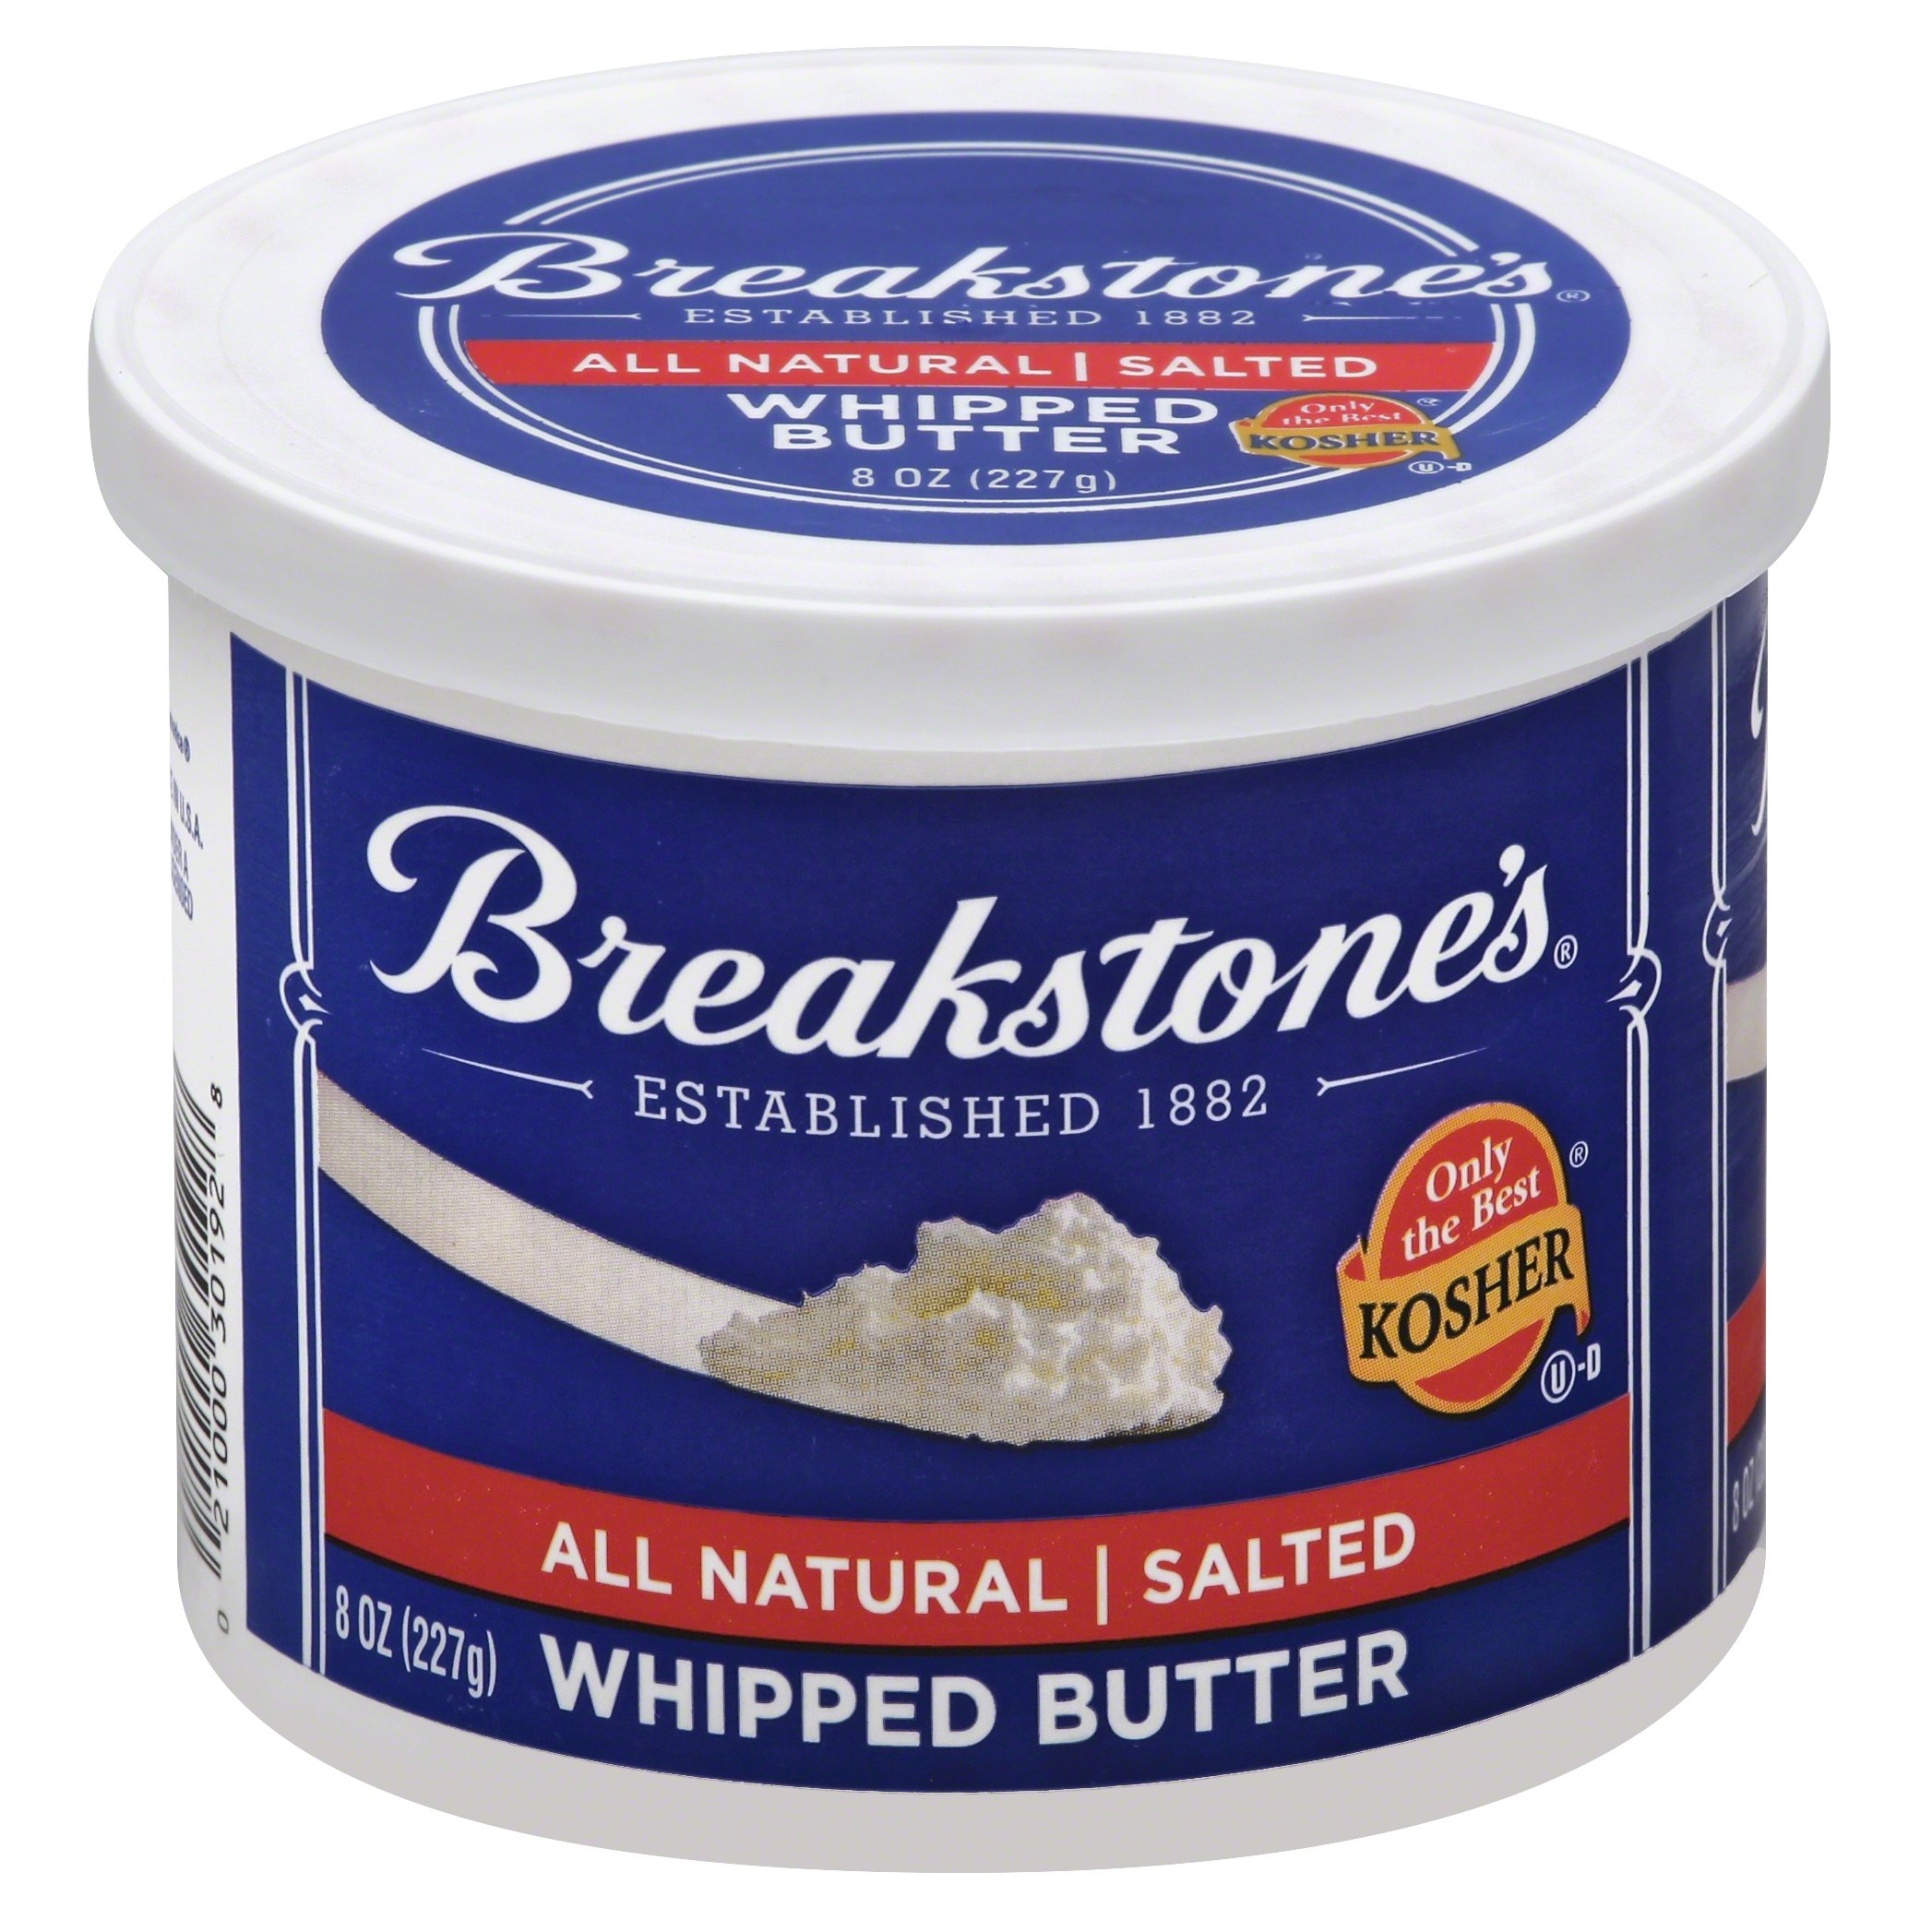 slide 1 of 2, Breakstone's All Natural Salted Whipped Butter, 8 oz